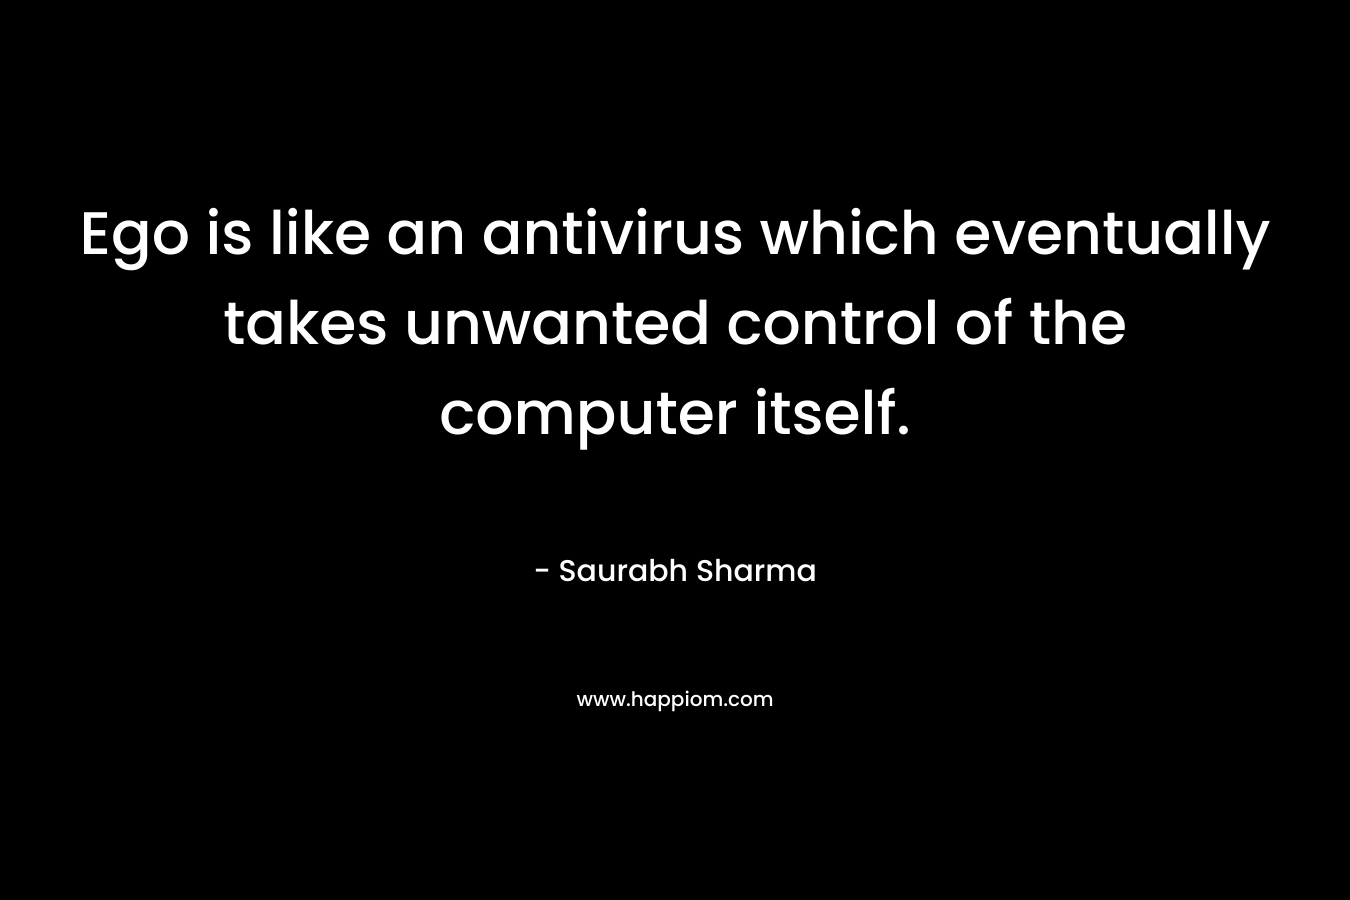 Ego is like an antivirus which eventually takes unwanted control of the computer itself.